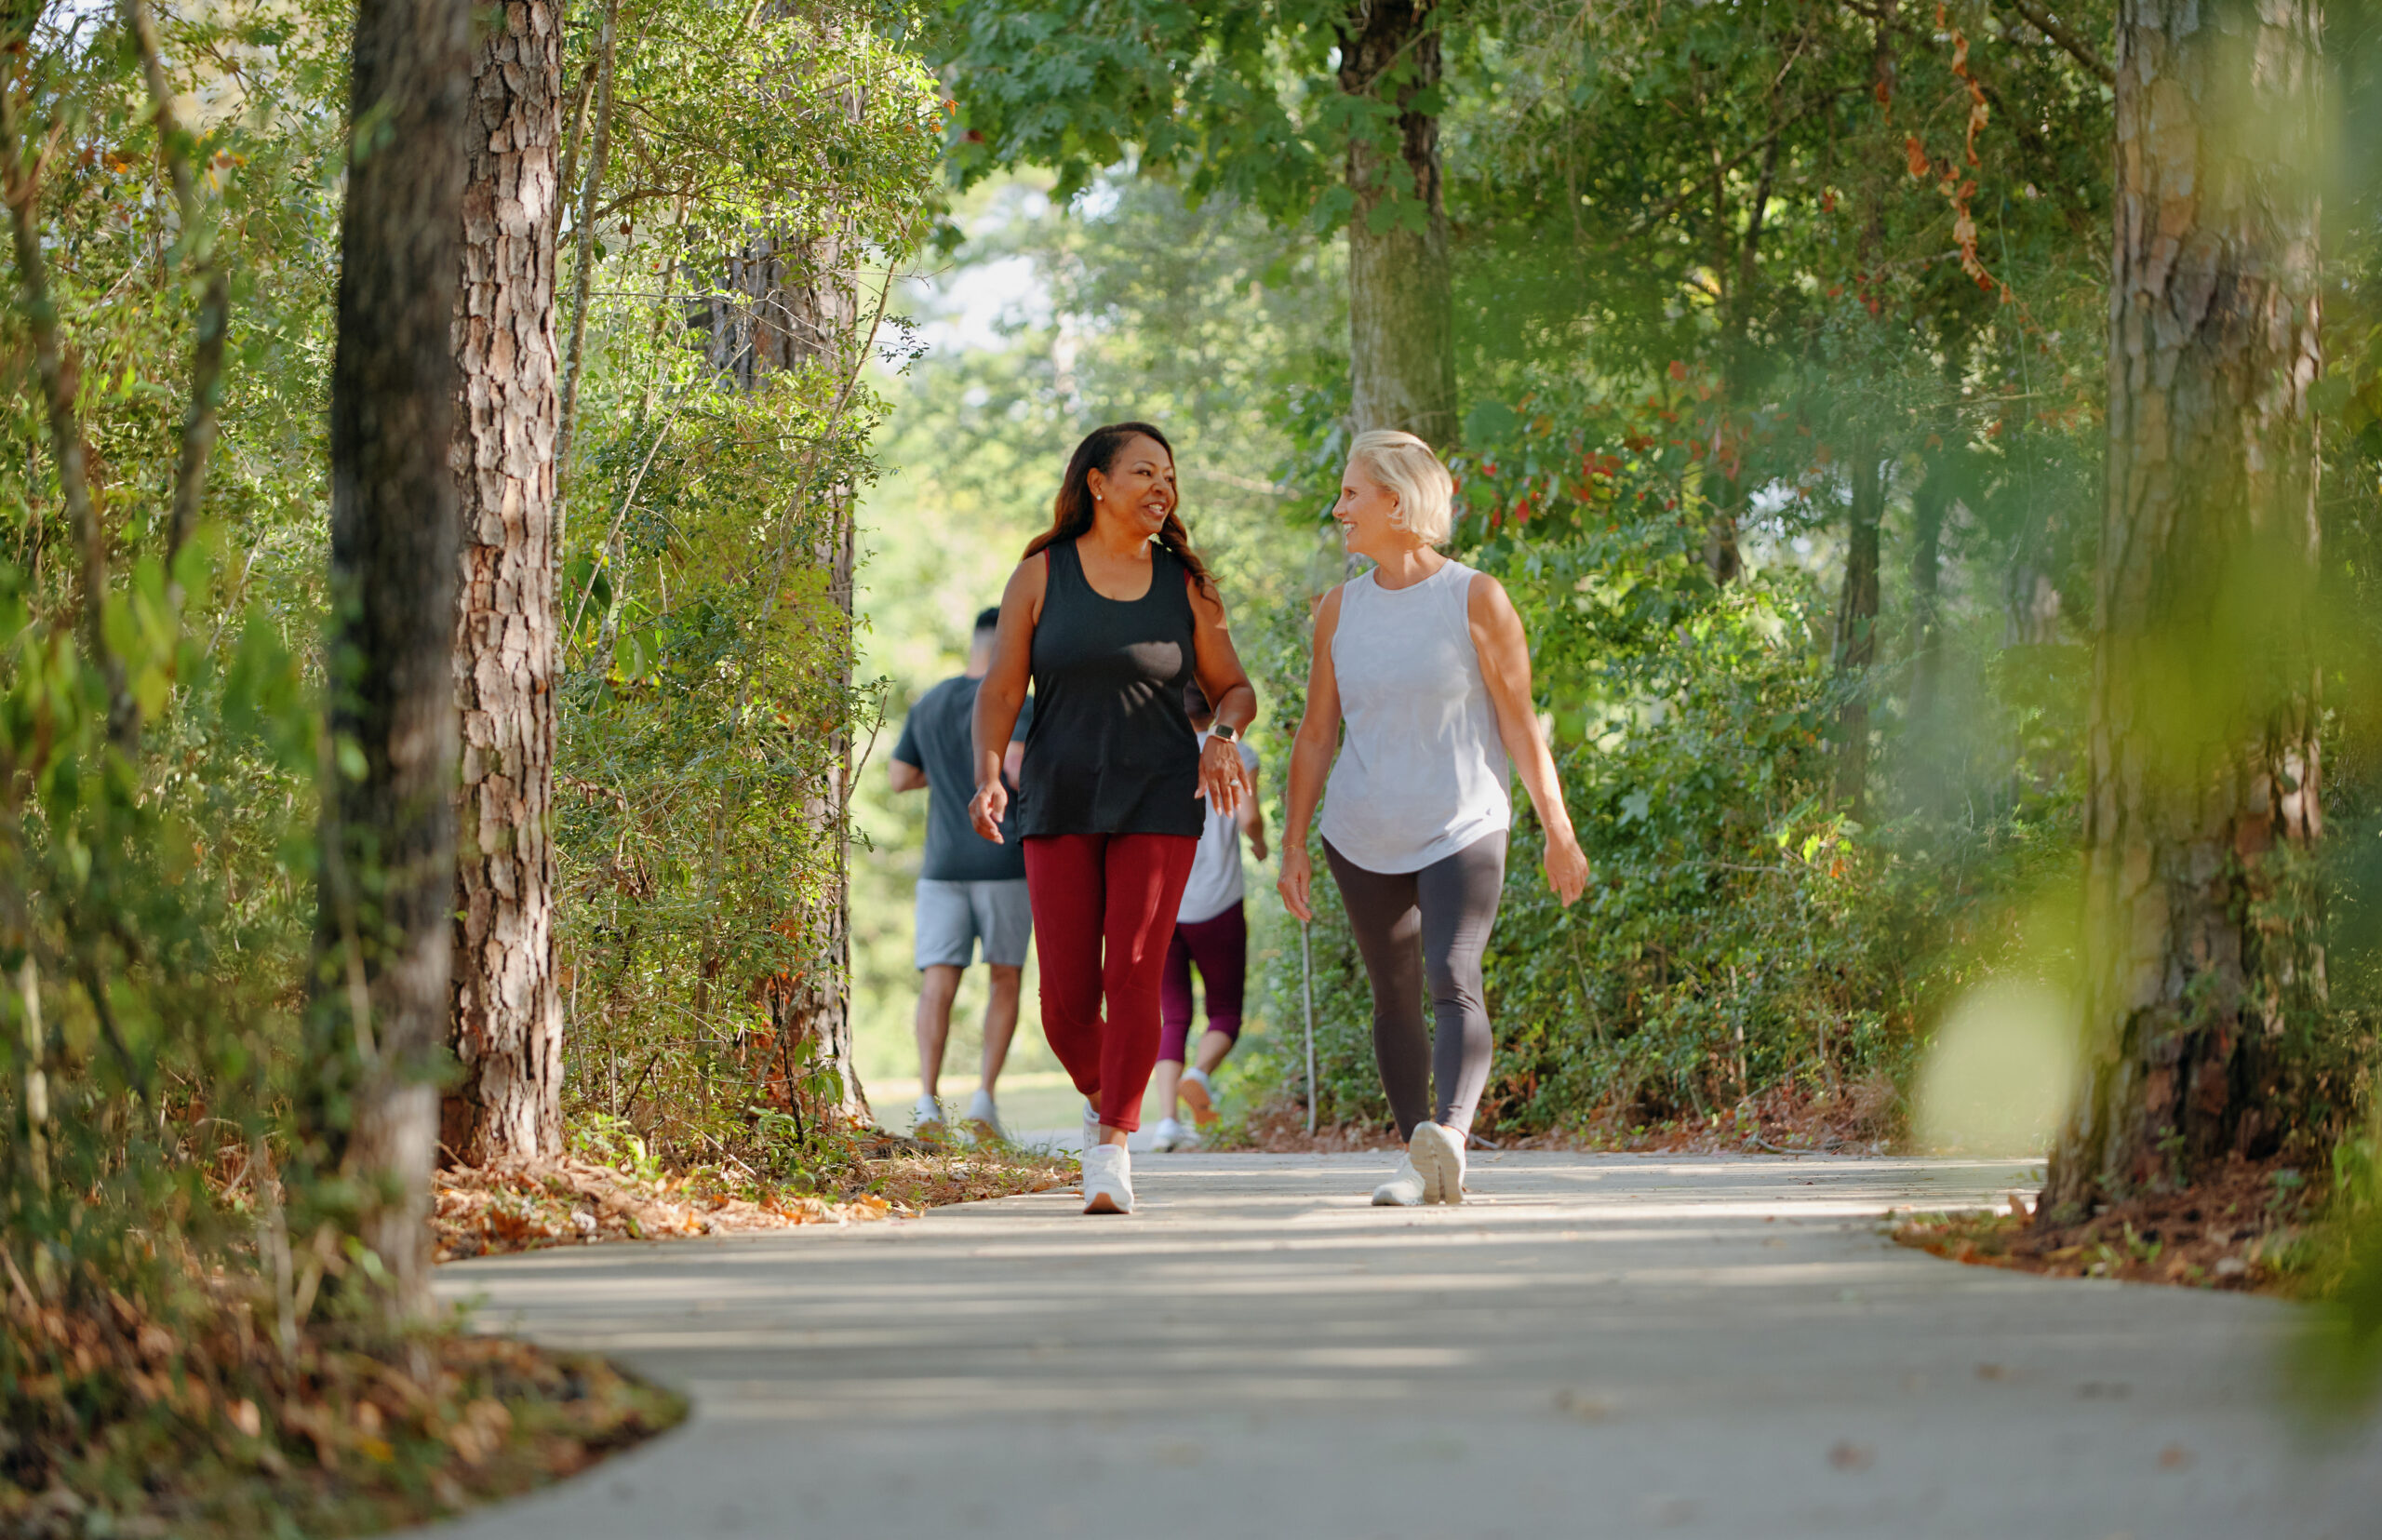 May is National Walking Month – Let’s Go!